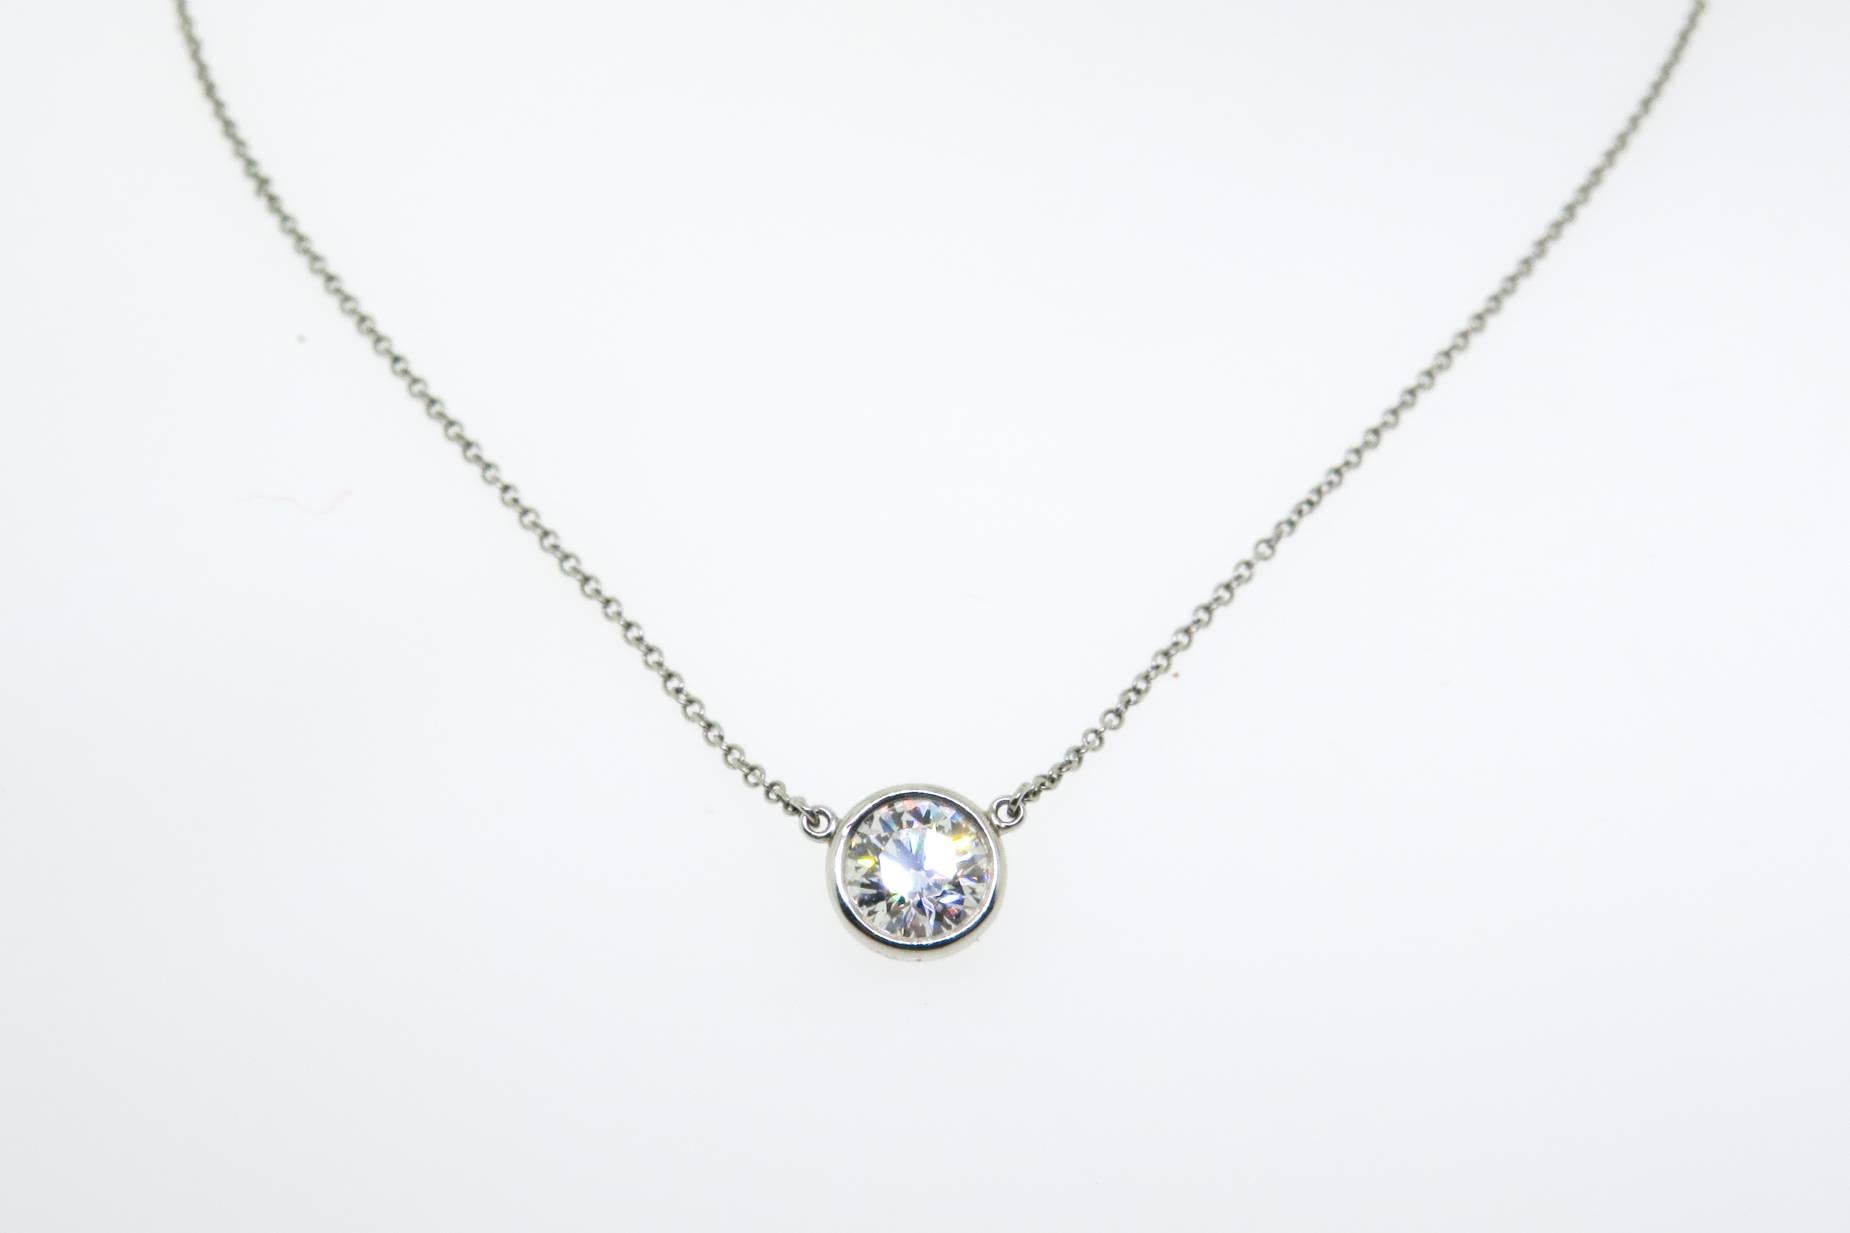 Tiffany Single round diamond catches the light and makes it dance. This Pendant is crafted in Platinum with a 0.90 carat round brilliant diamond G/H color, SI1 clarity, on a 16